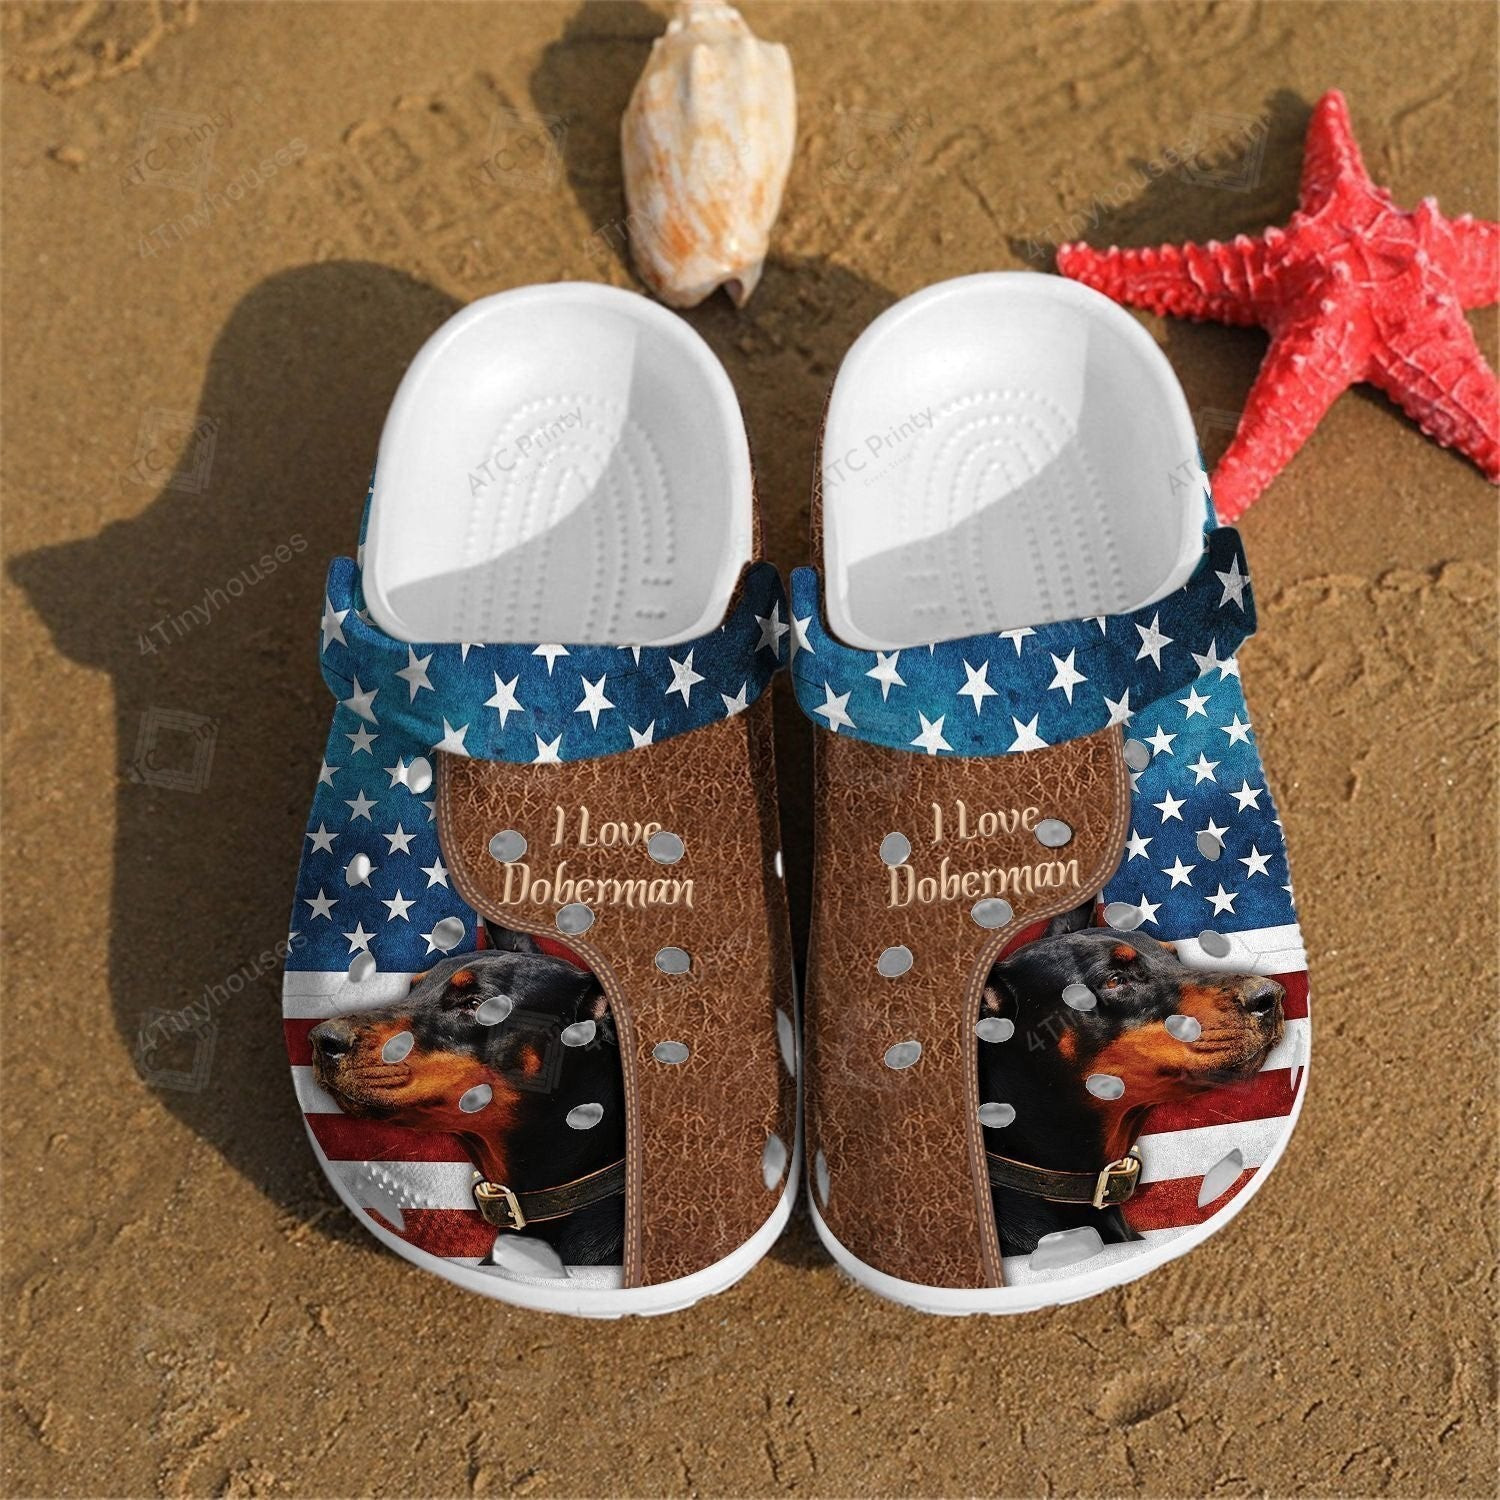 Love Doberman Usa Shoes - For Who Love Dog Crocs Clogs Gifts